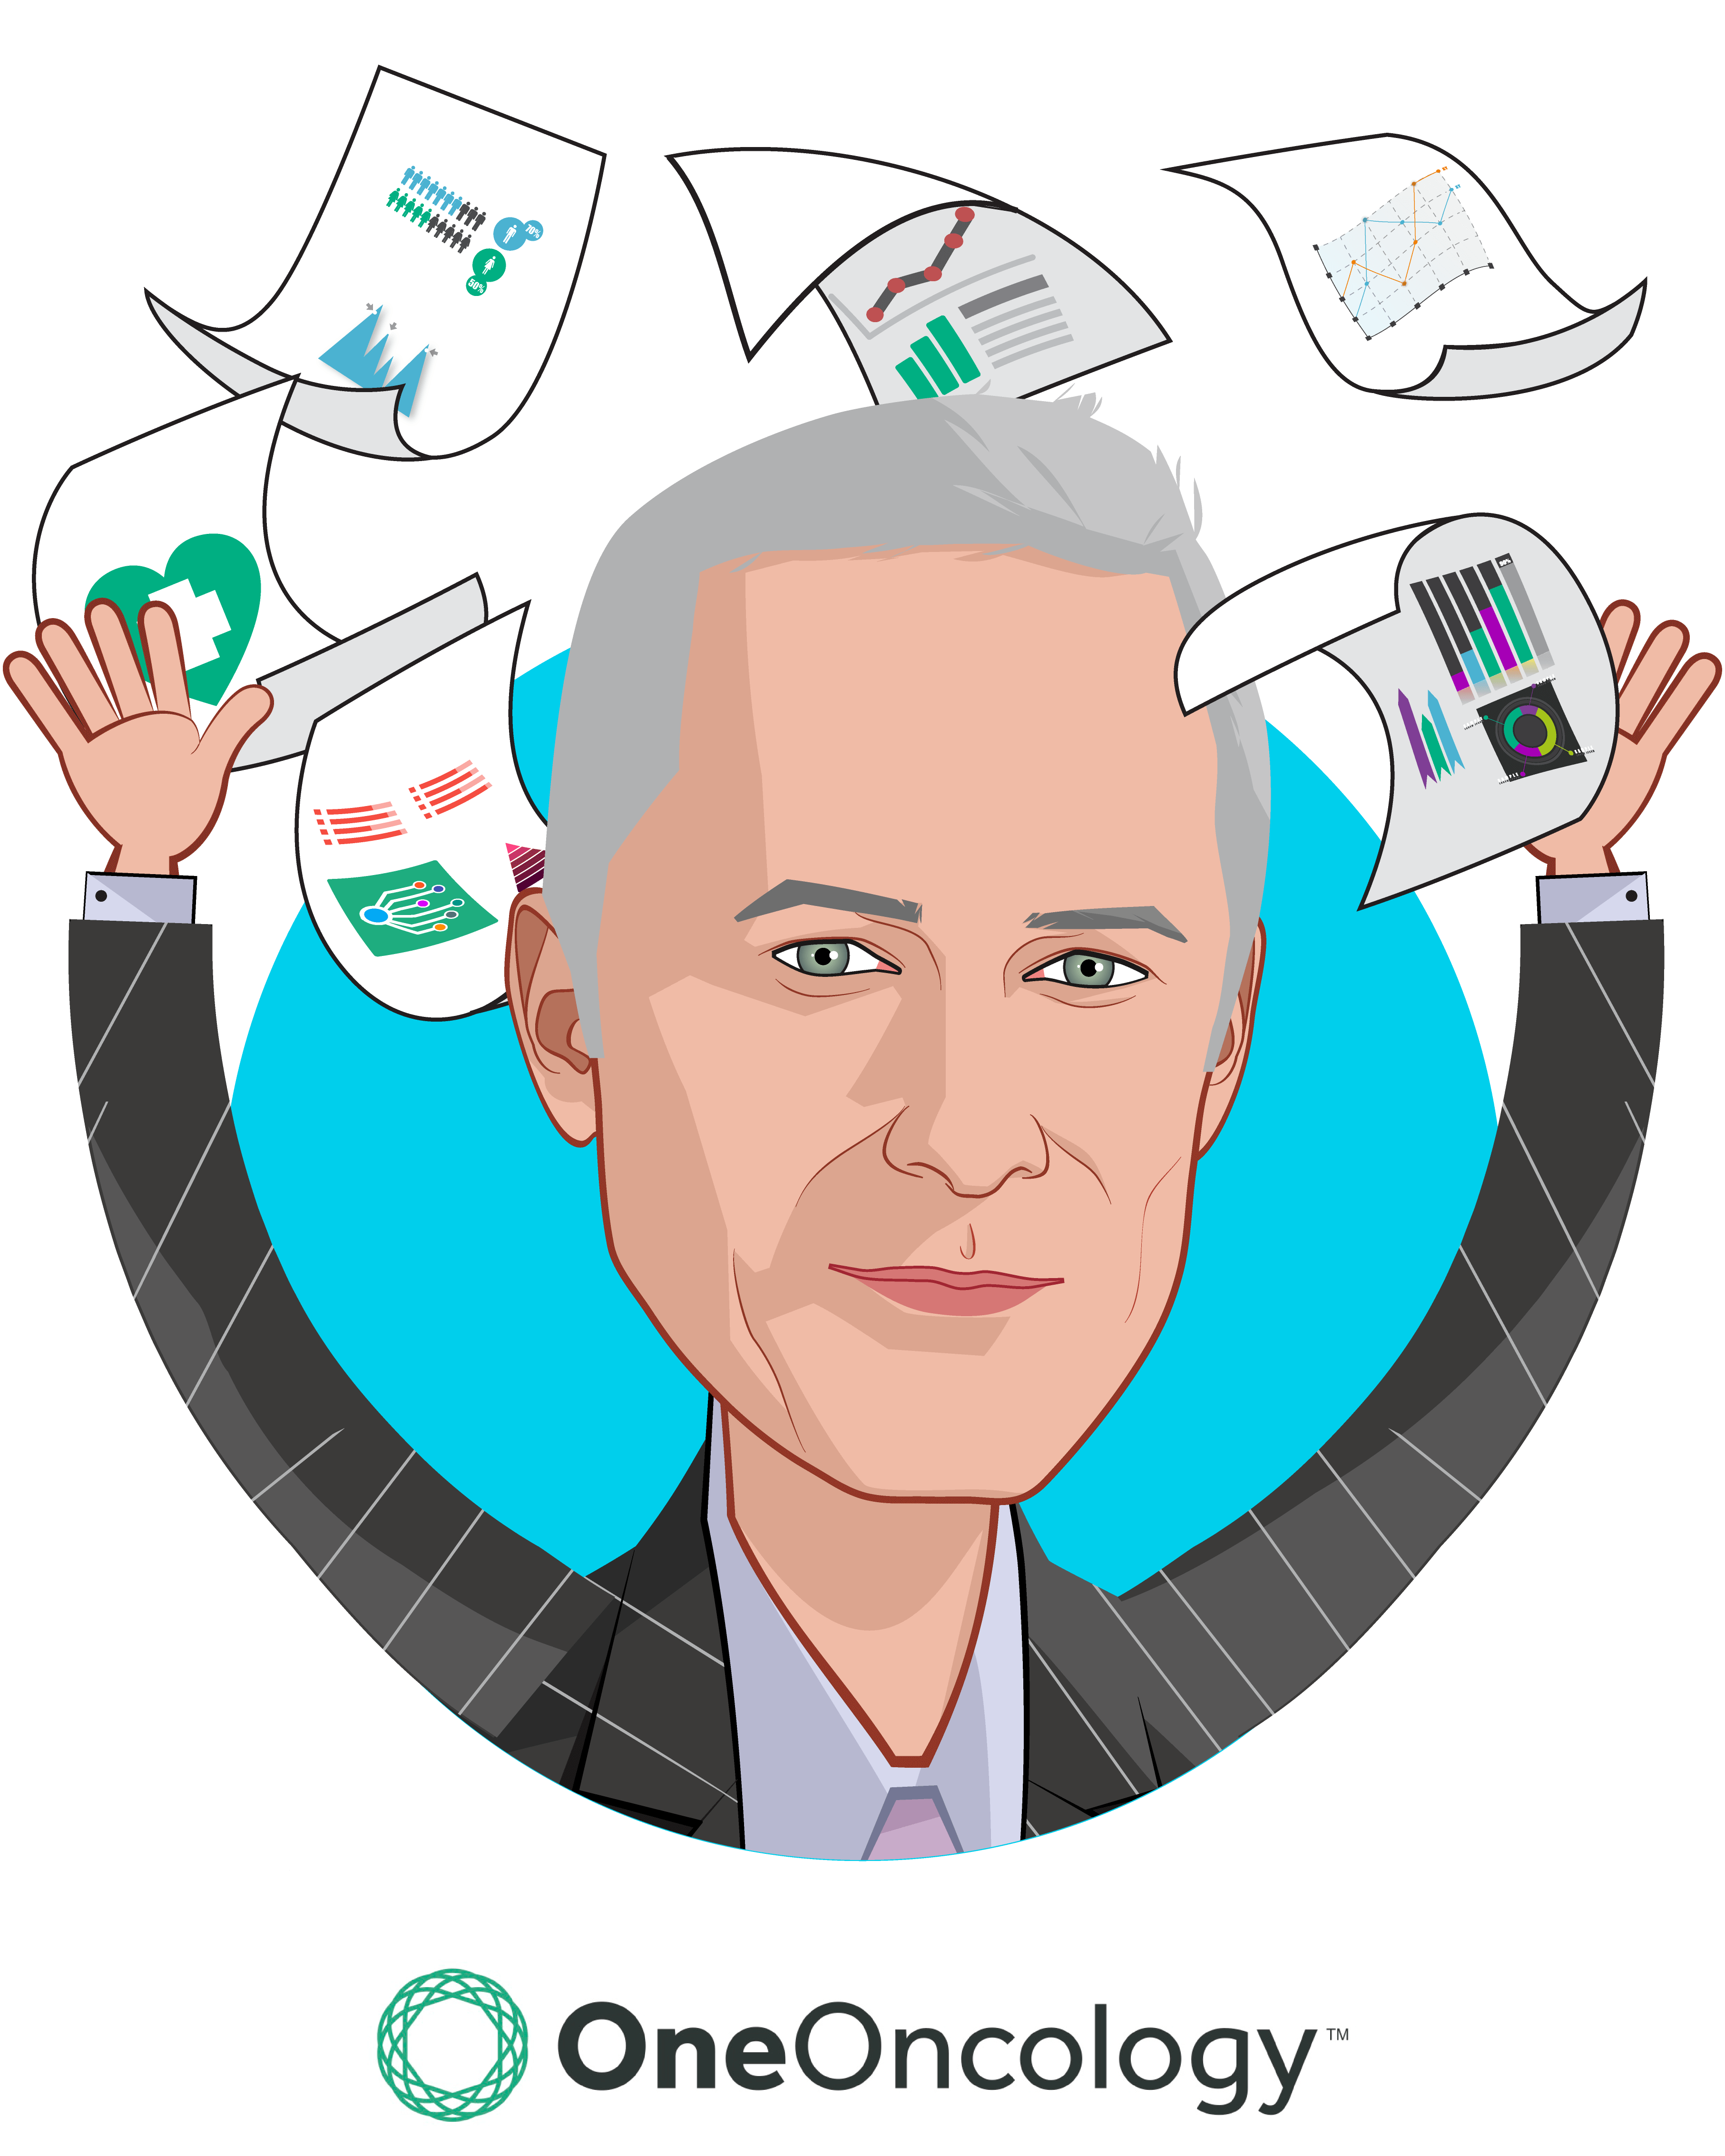 Overlay caricature of Tracy L. Bahl, who is speaking at HLTH and is President & Chief Executive Officer at OneOncology